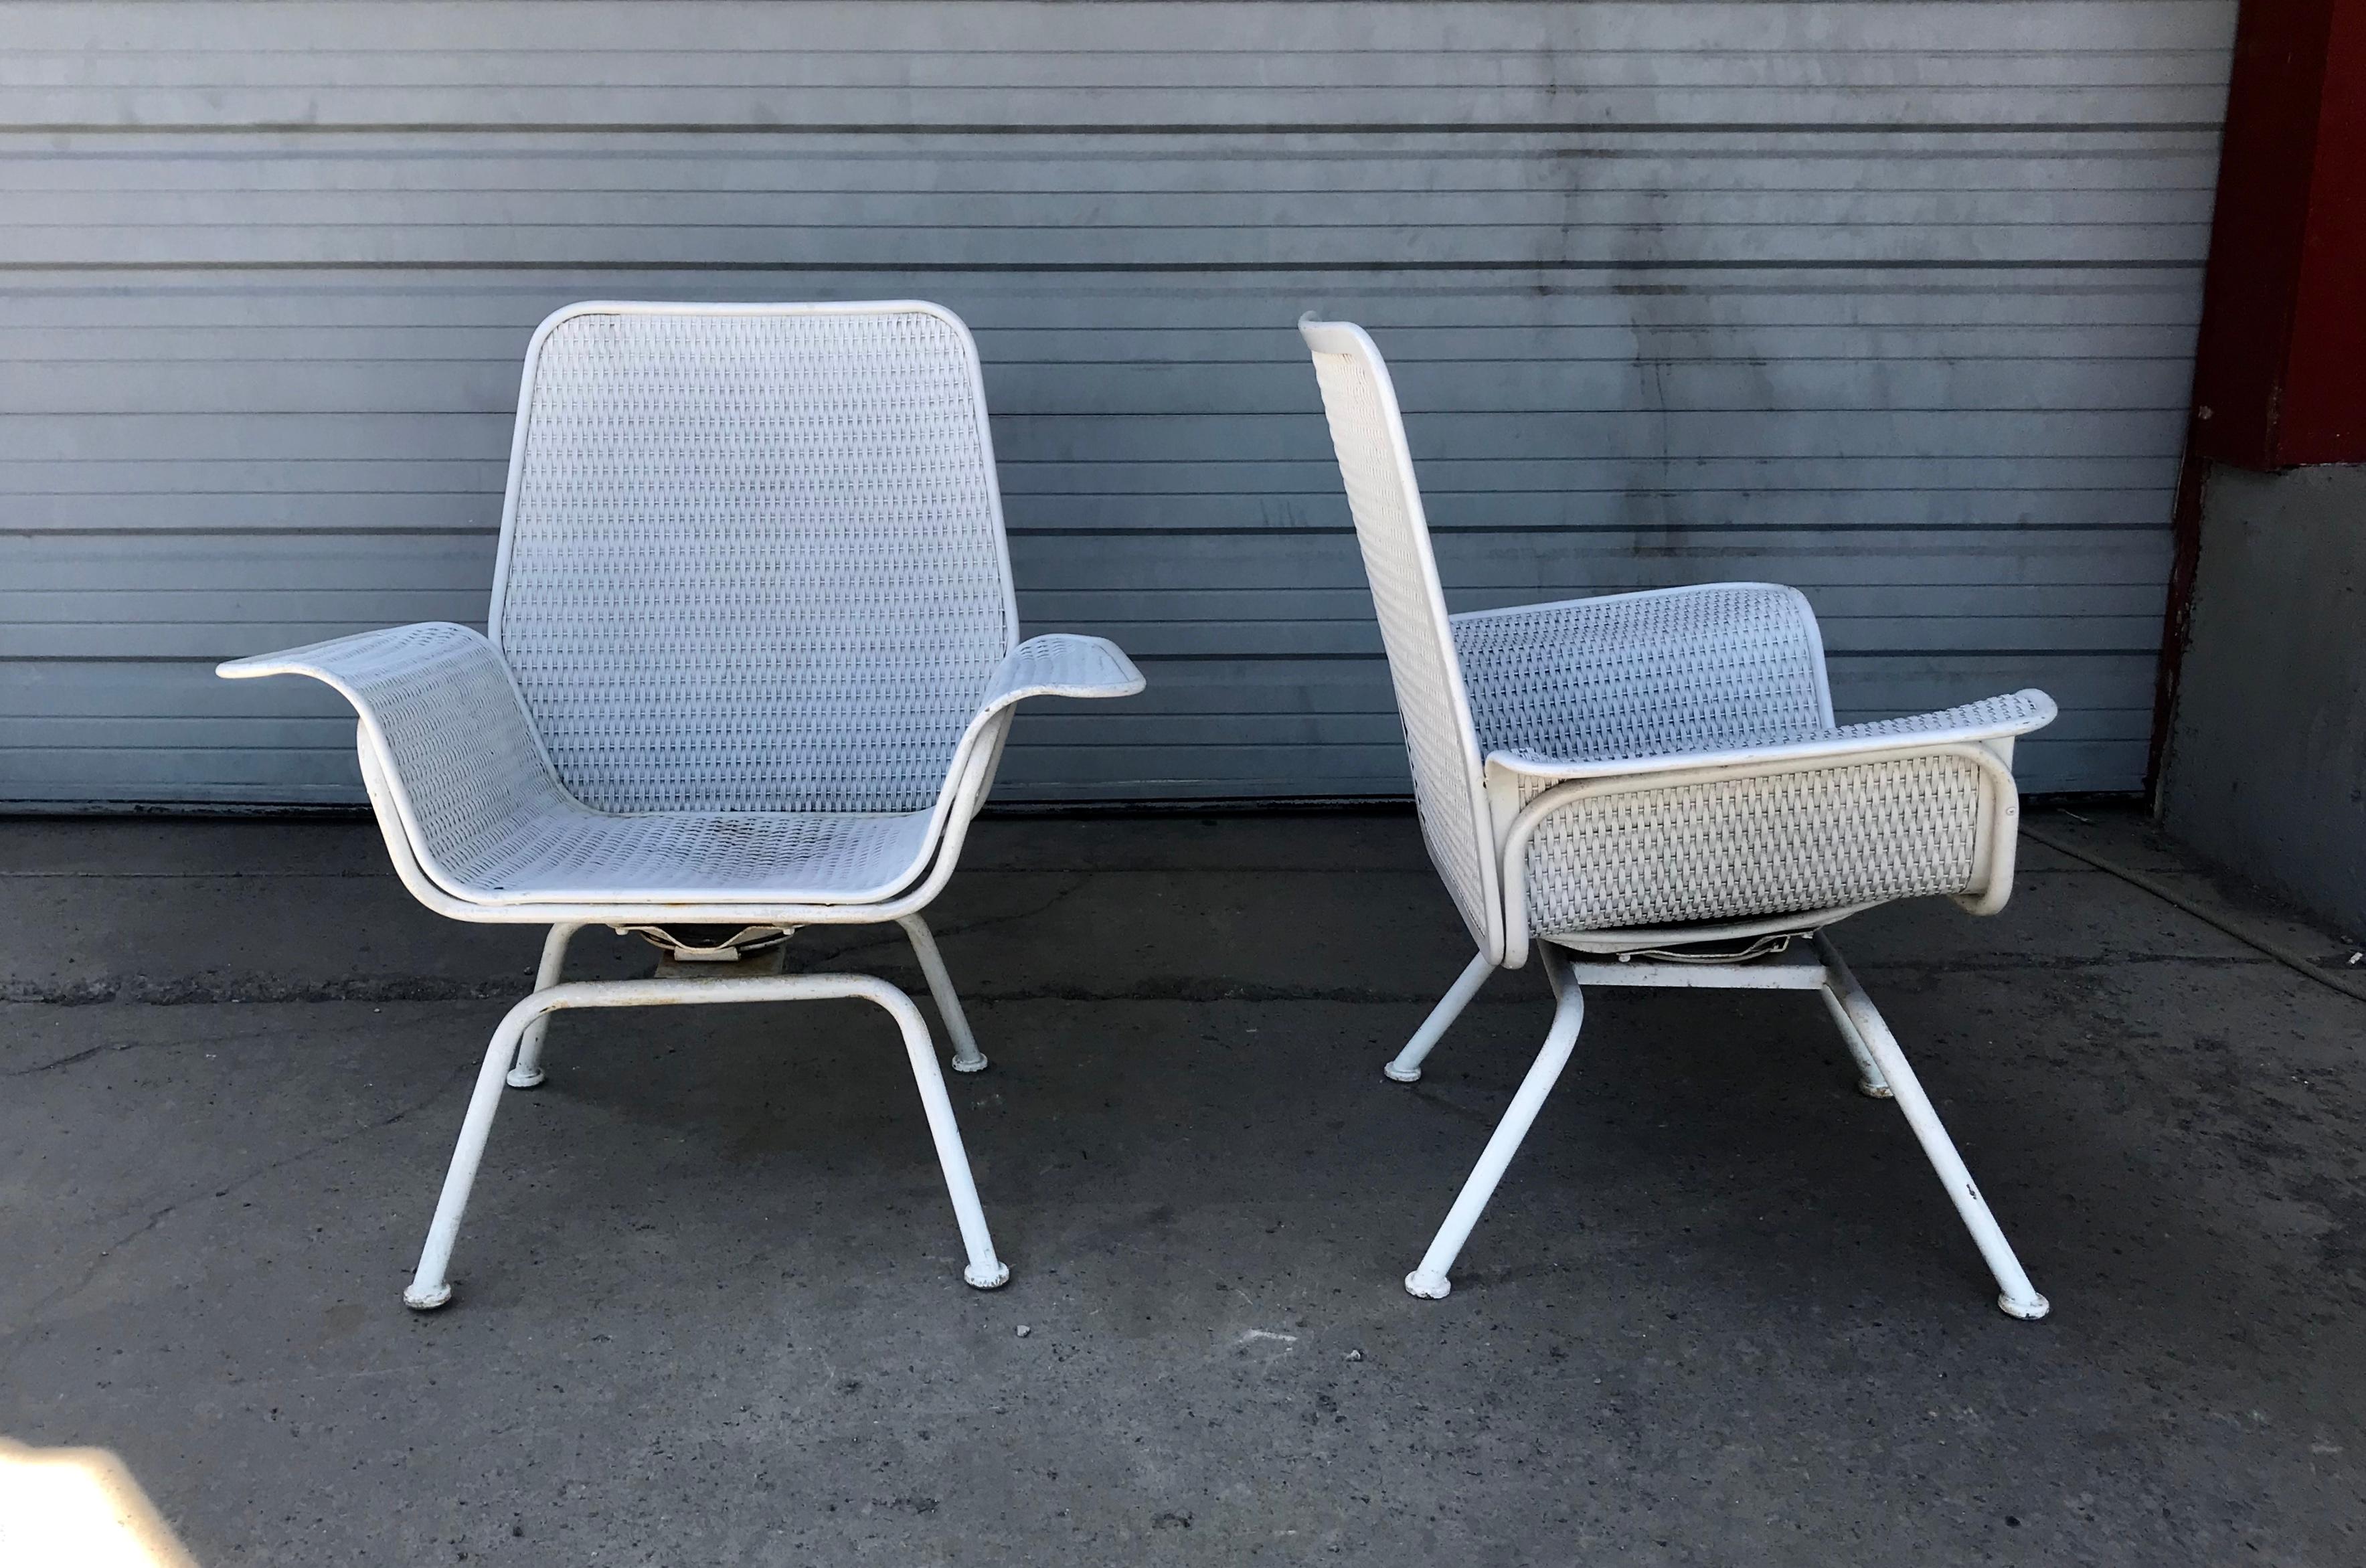 Painted Pair of Mid-Century Modern Wicker and Metal Outdoor Lounge Chairs, Woodard